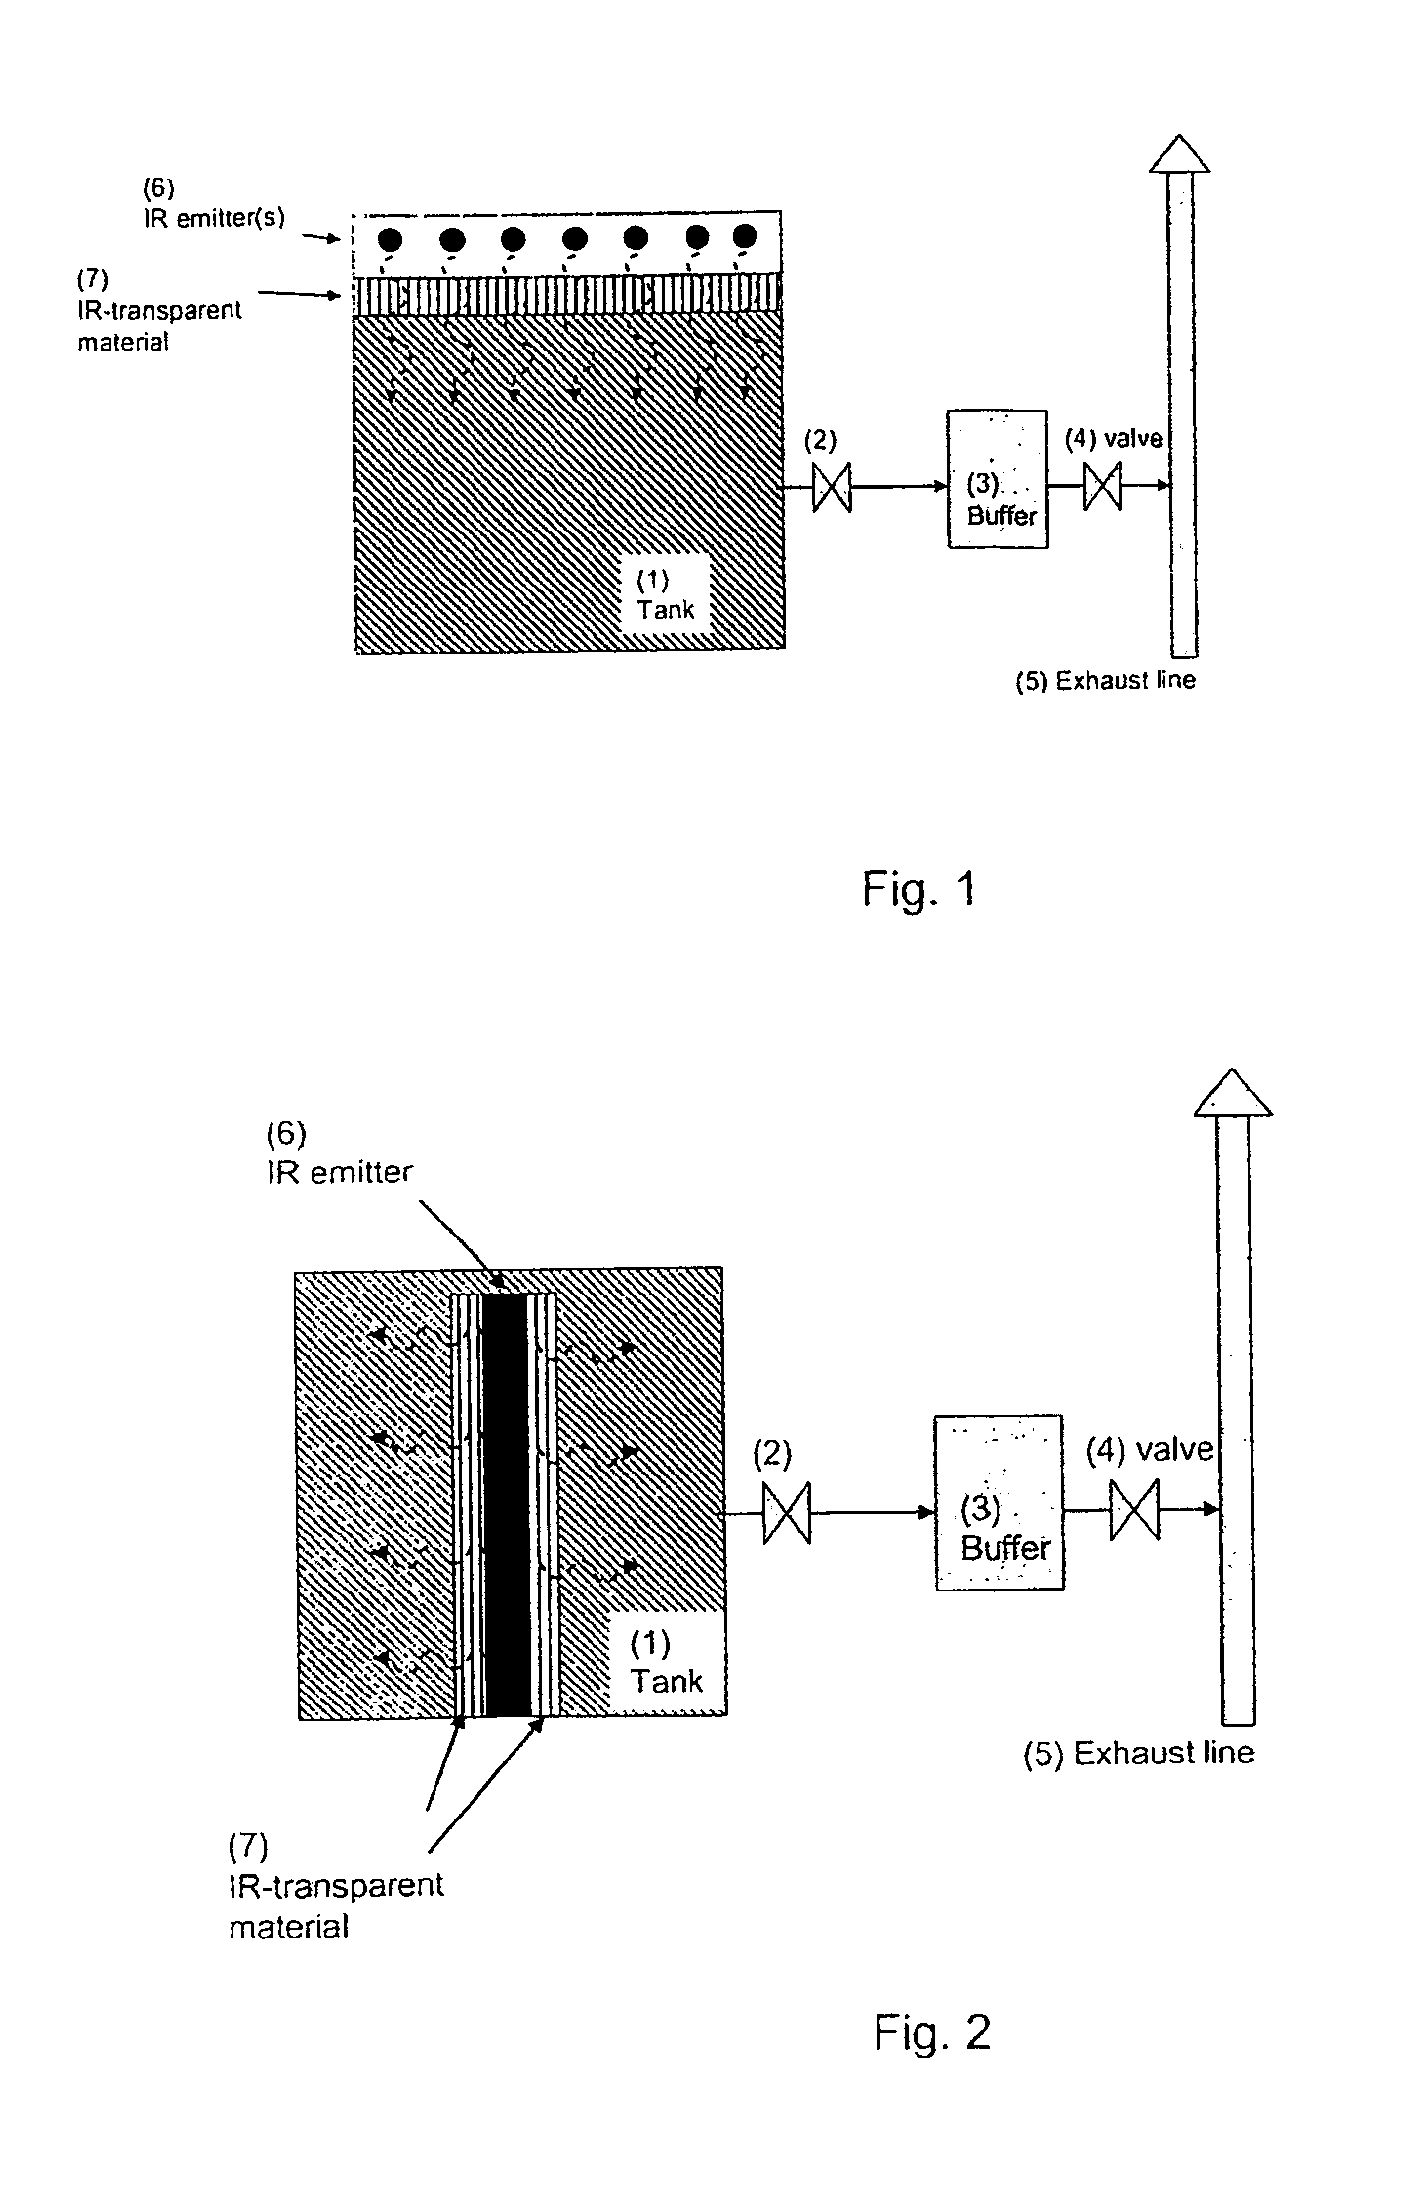 Method of Storing and Delivering Ammonia and the Use of Electromagnetic Radiation for Desorption of Ammonia from a Chemical Complex